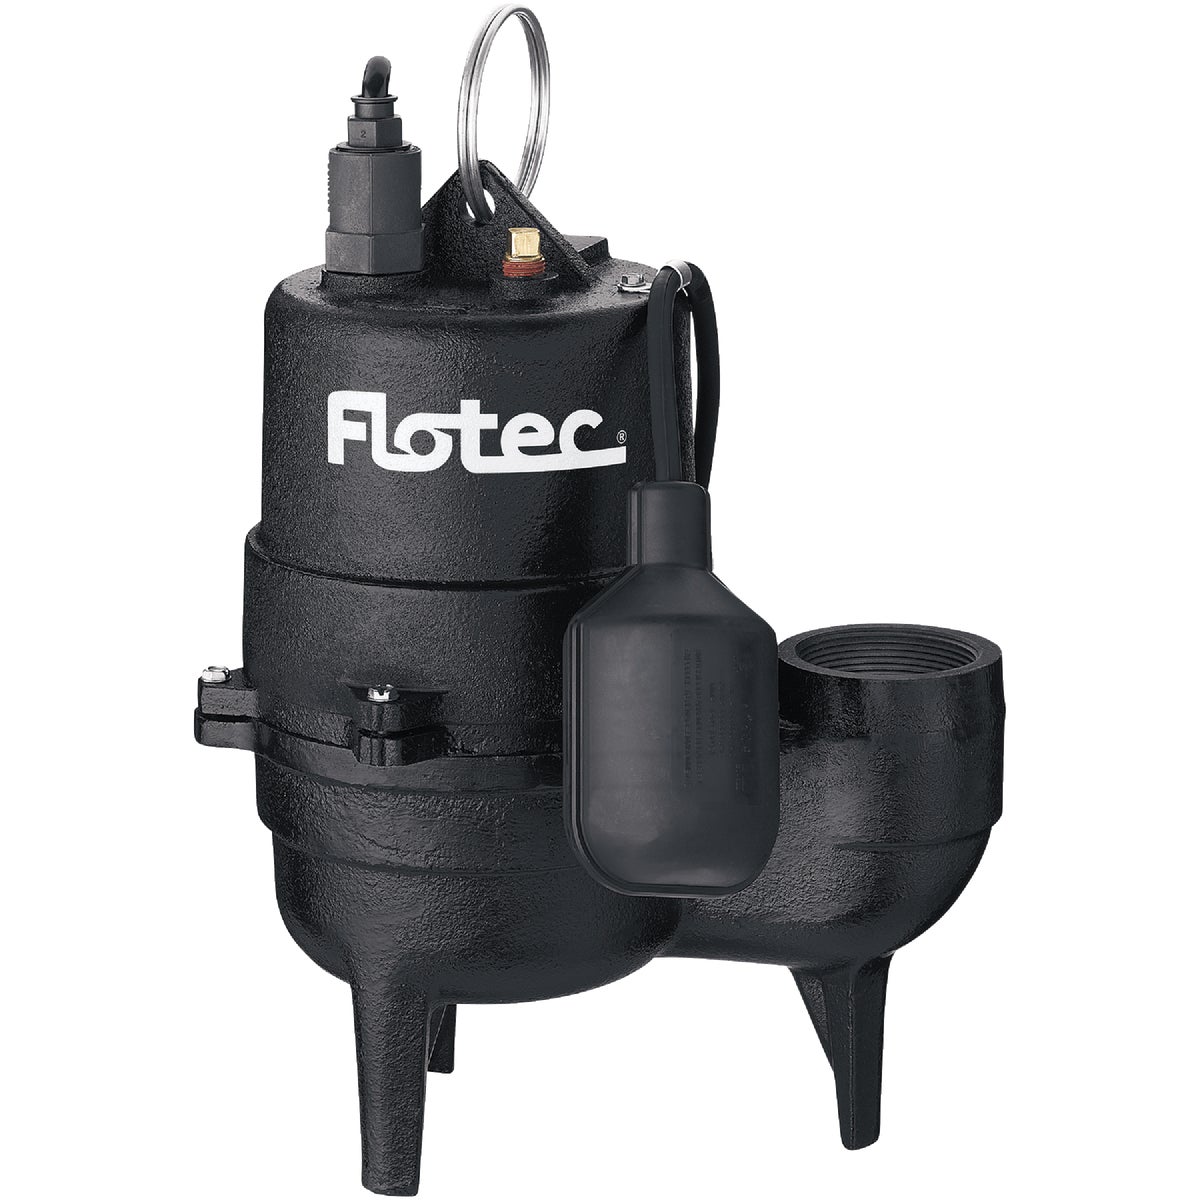 Flotec 1/2 H.P. Cast Iron Sewage Ejector Pump with Tethered Switch